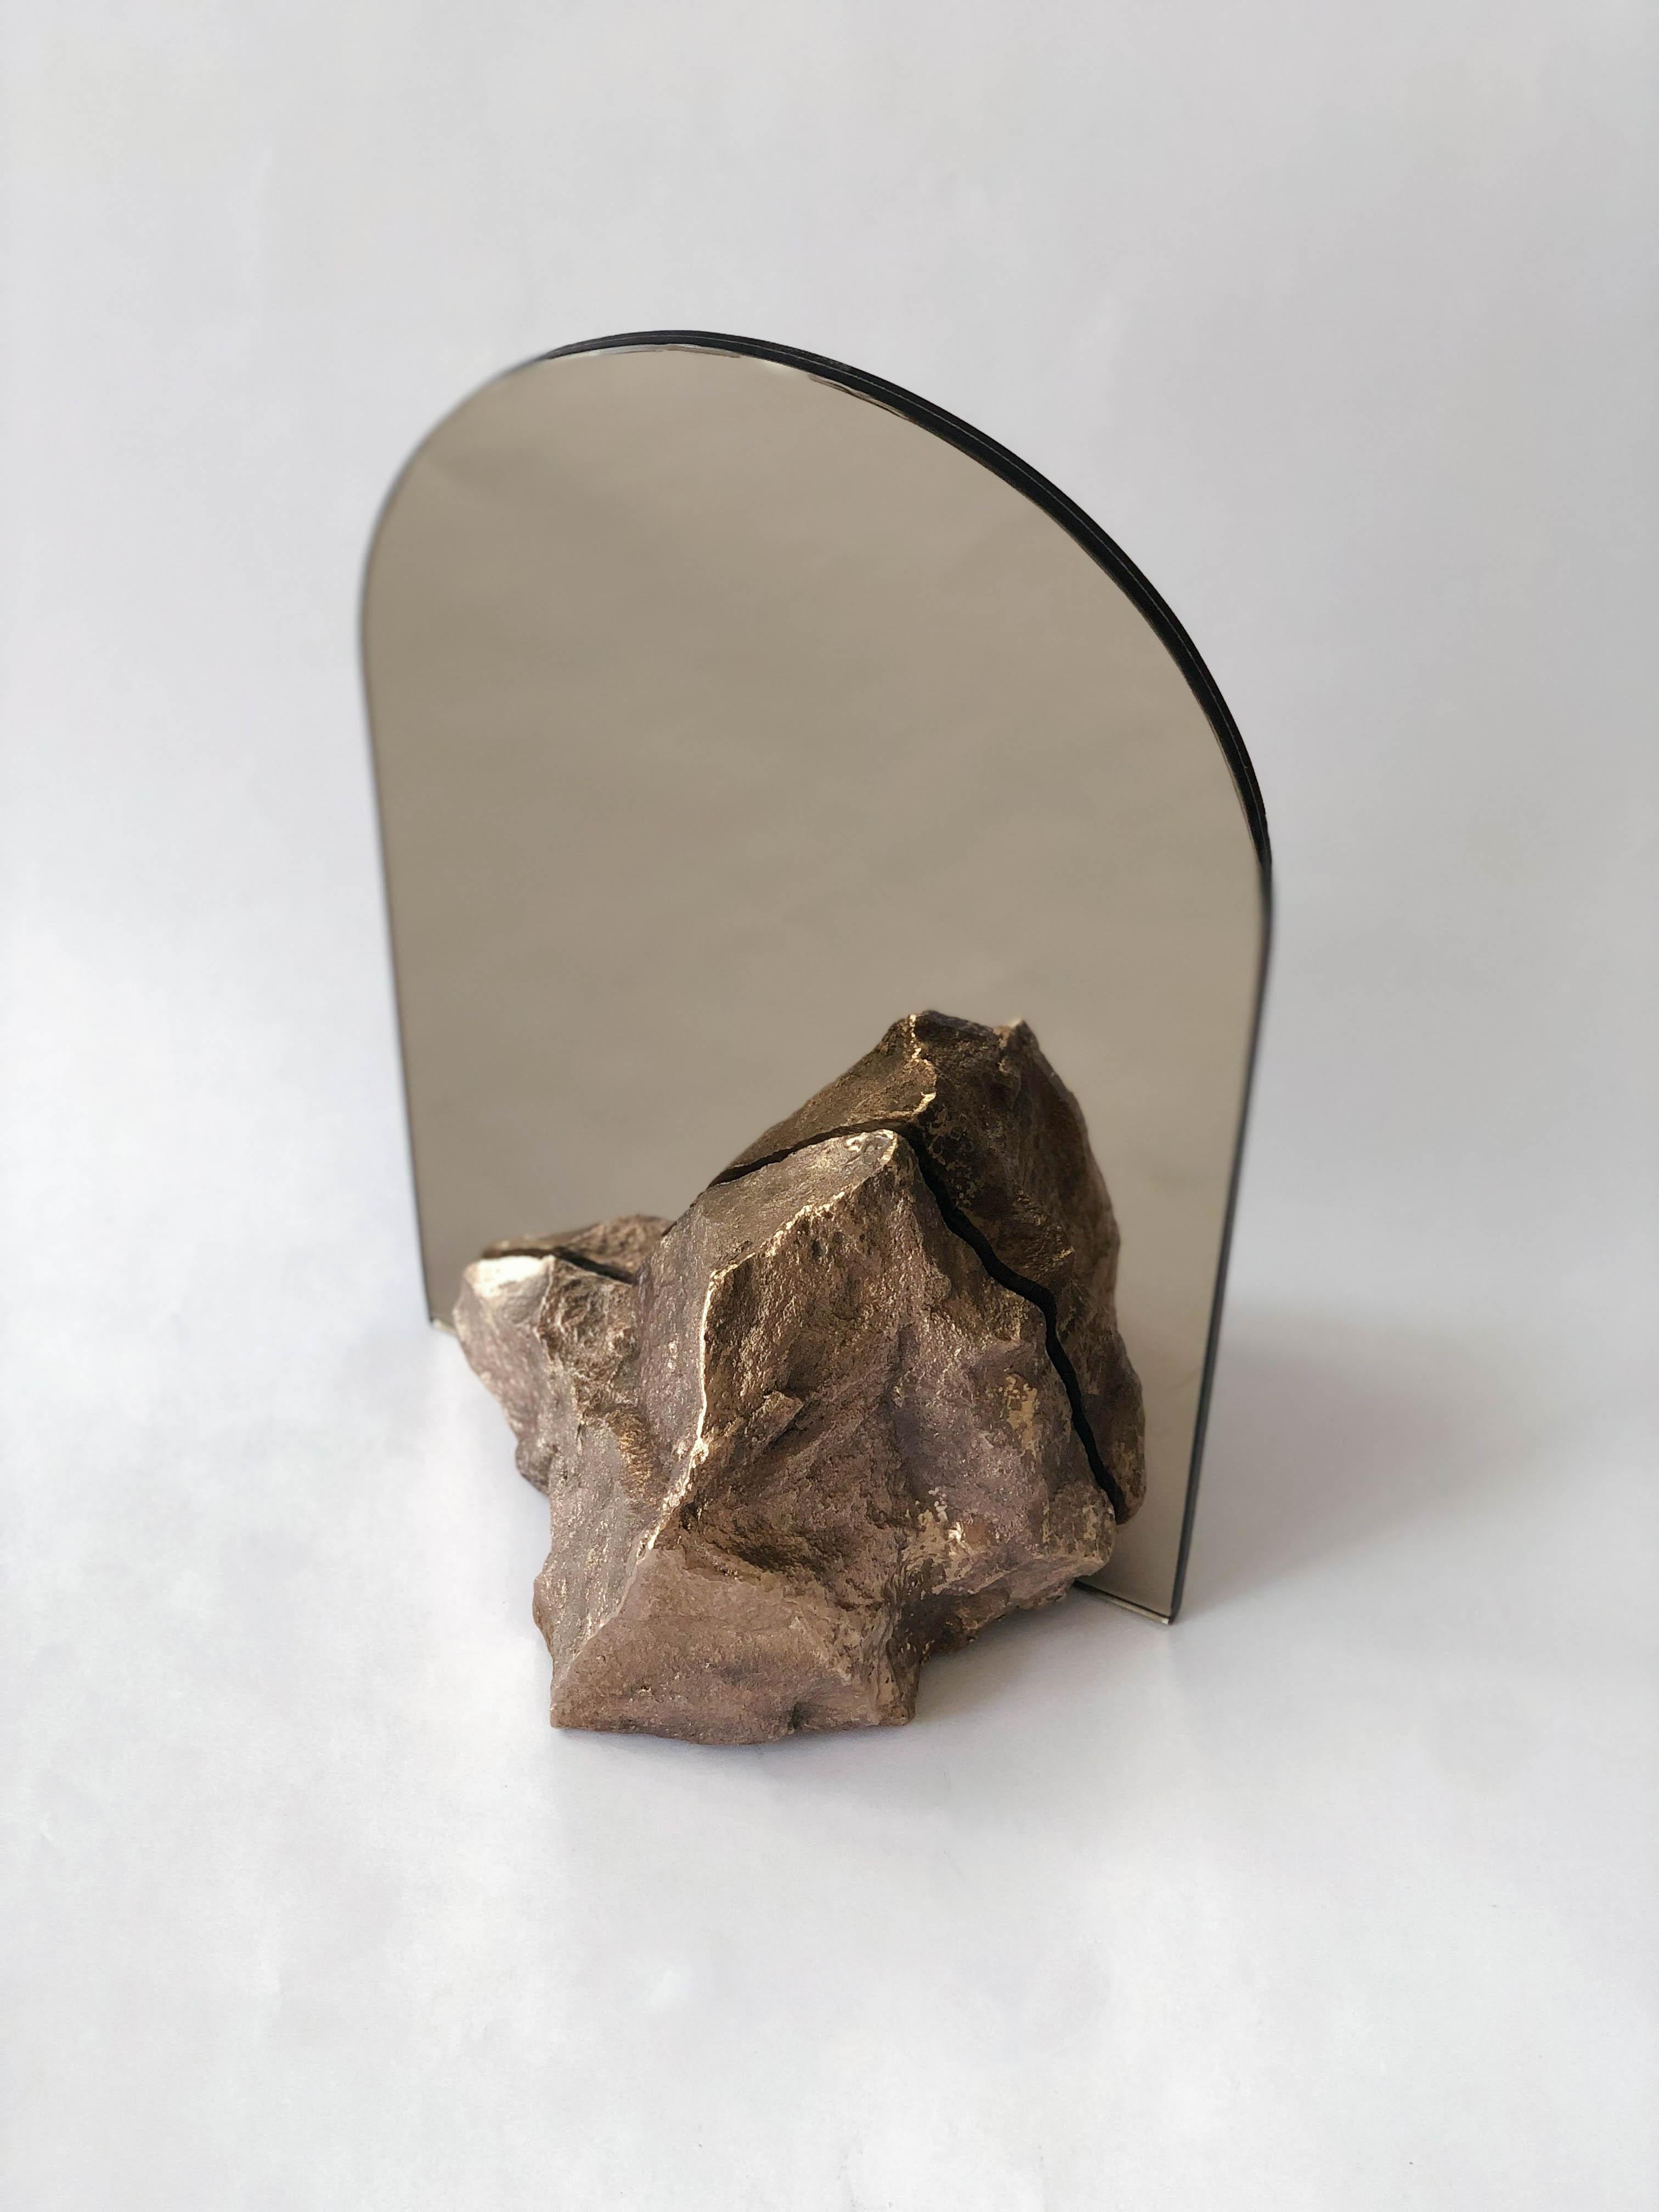 Bronze mirror - Dessislava Madanska
Onedesignspace
Title: Mirror, Mirror
Object: Desk Mirror
Dimensions: W 20 x D 20 x H 30 cm
Materials: double-sided mirror, copper tinted and stone shape
structure casted in bronze. Patinated.

Dessislava